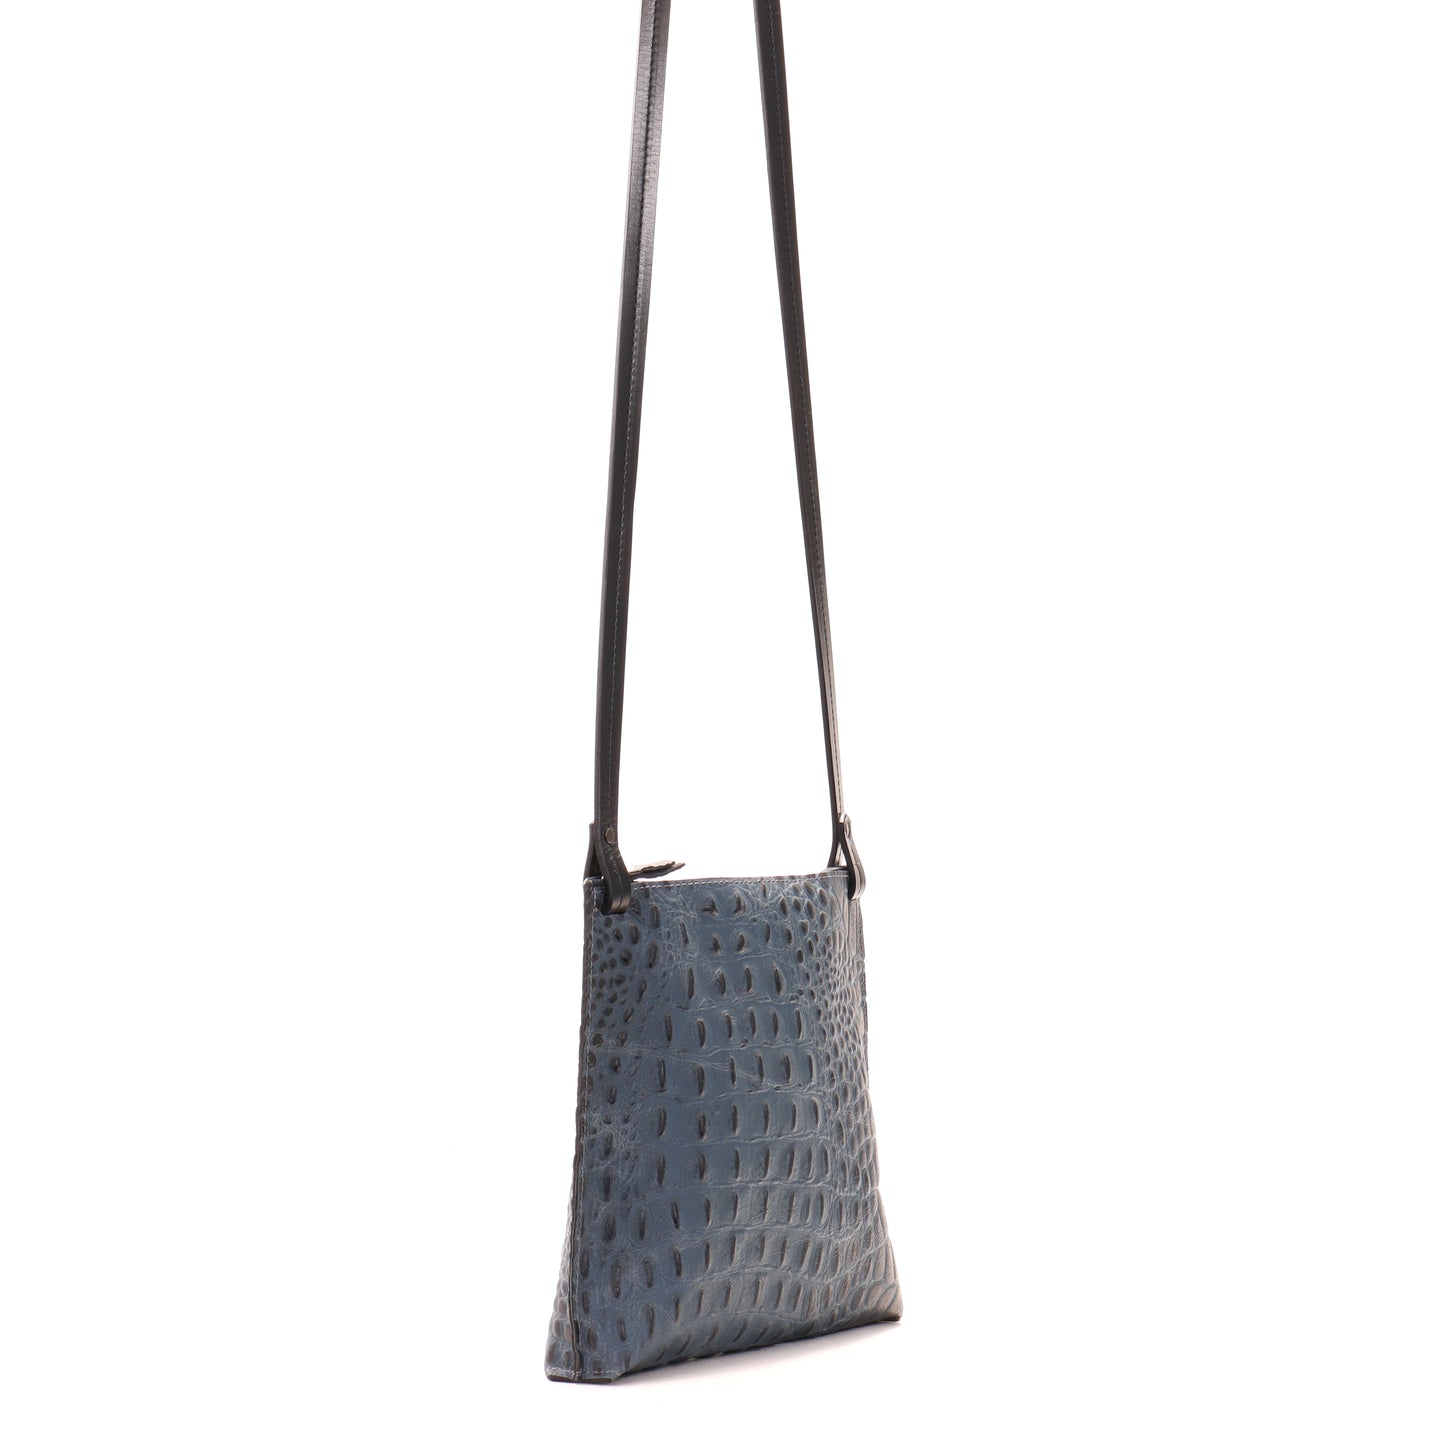 LARGE STRAPPY POUCH NAVY EMBOSSED CROC